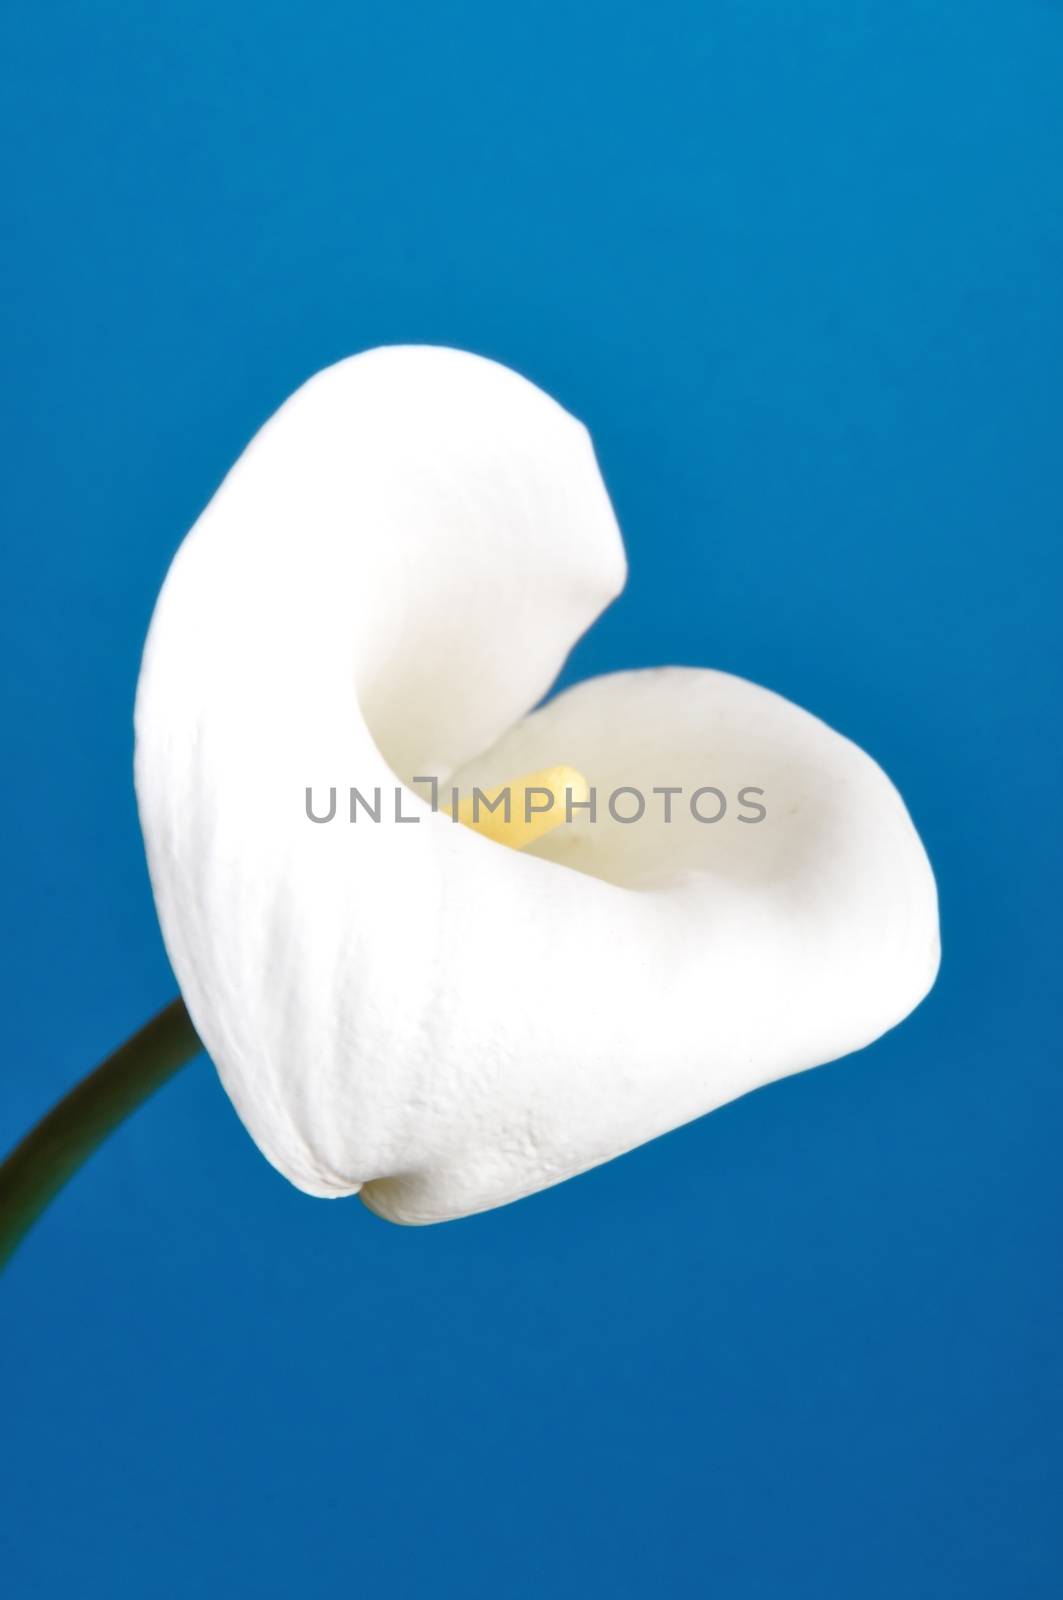 Arum lily by BZH22